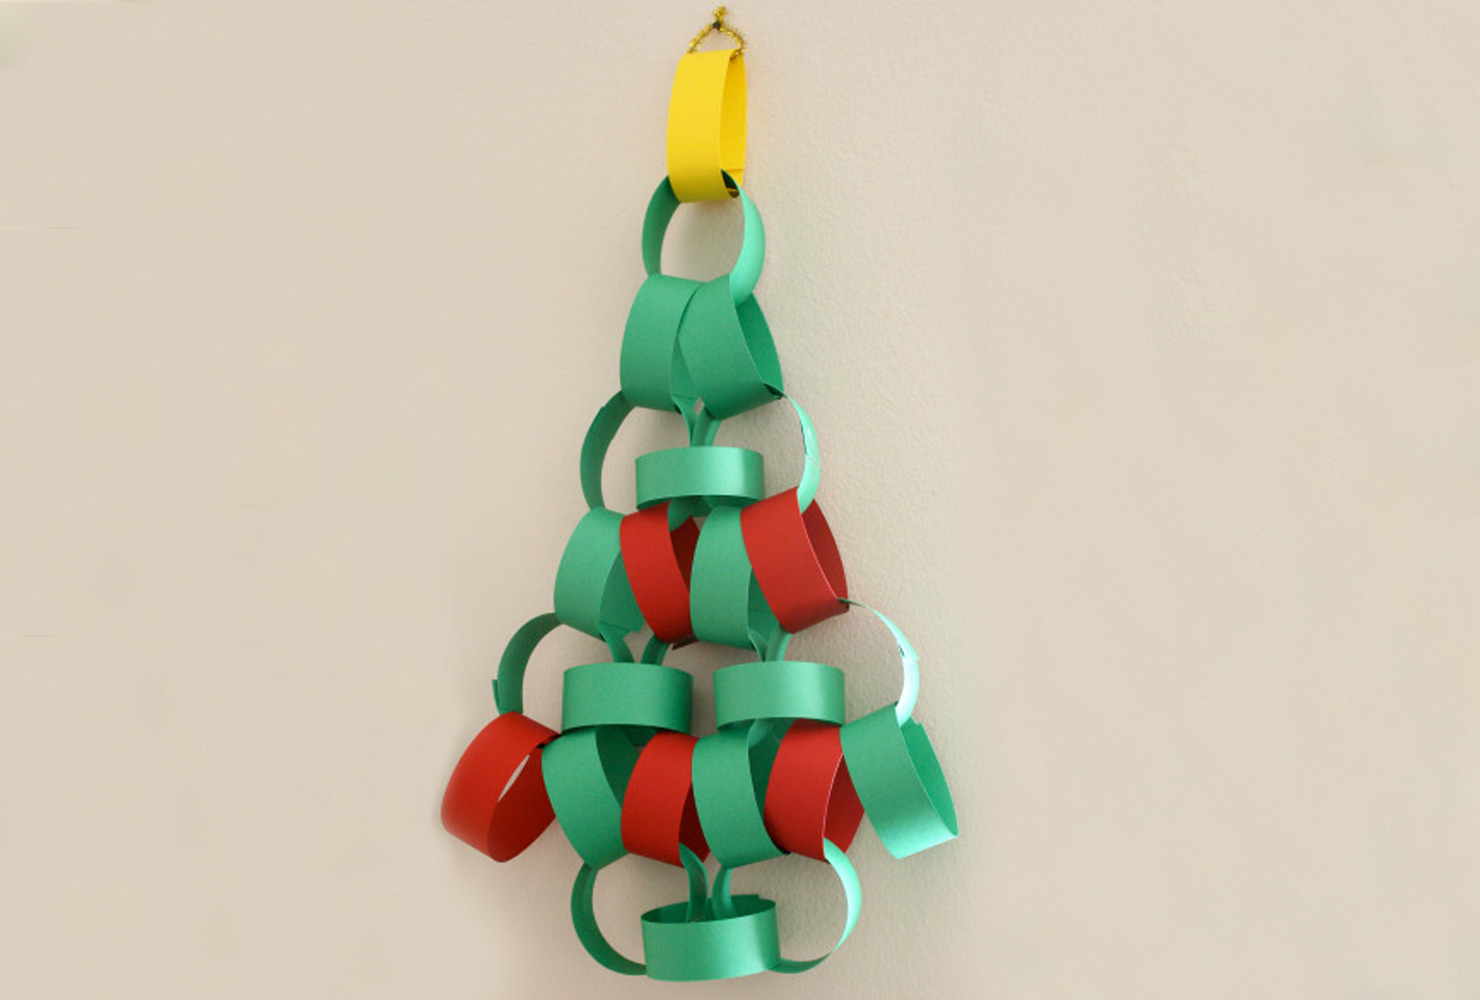  paper chains put together to form a tree